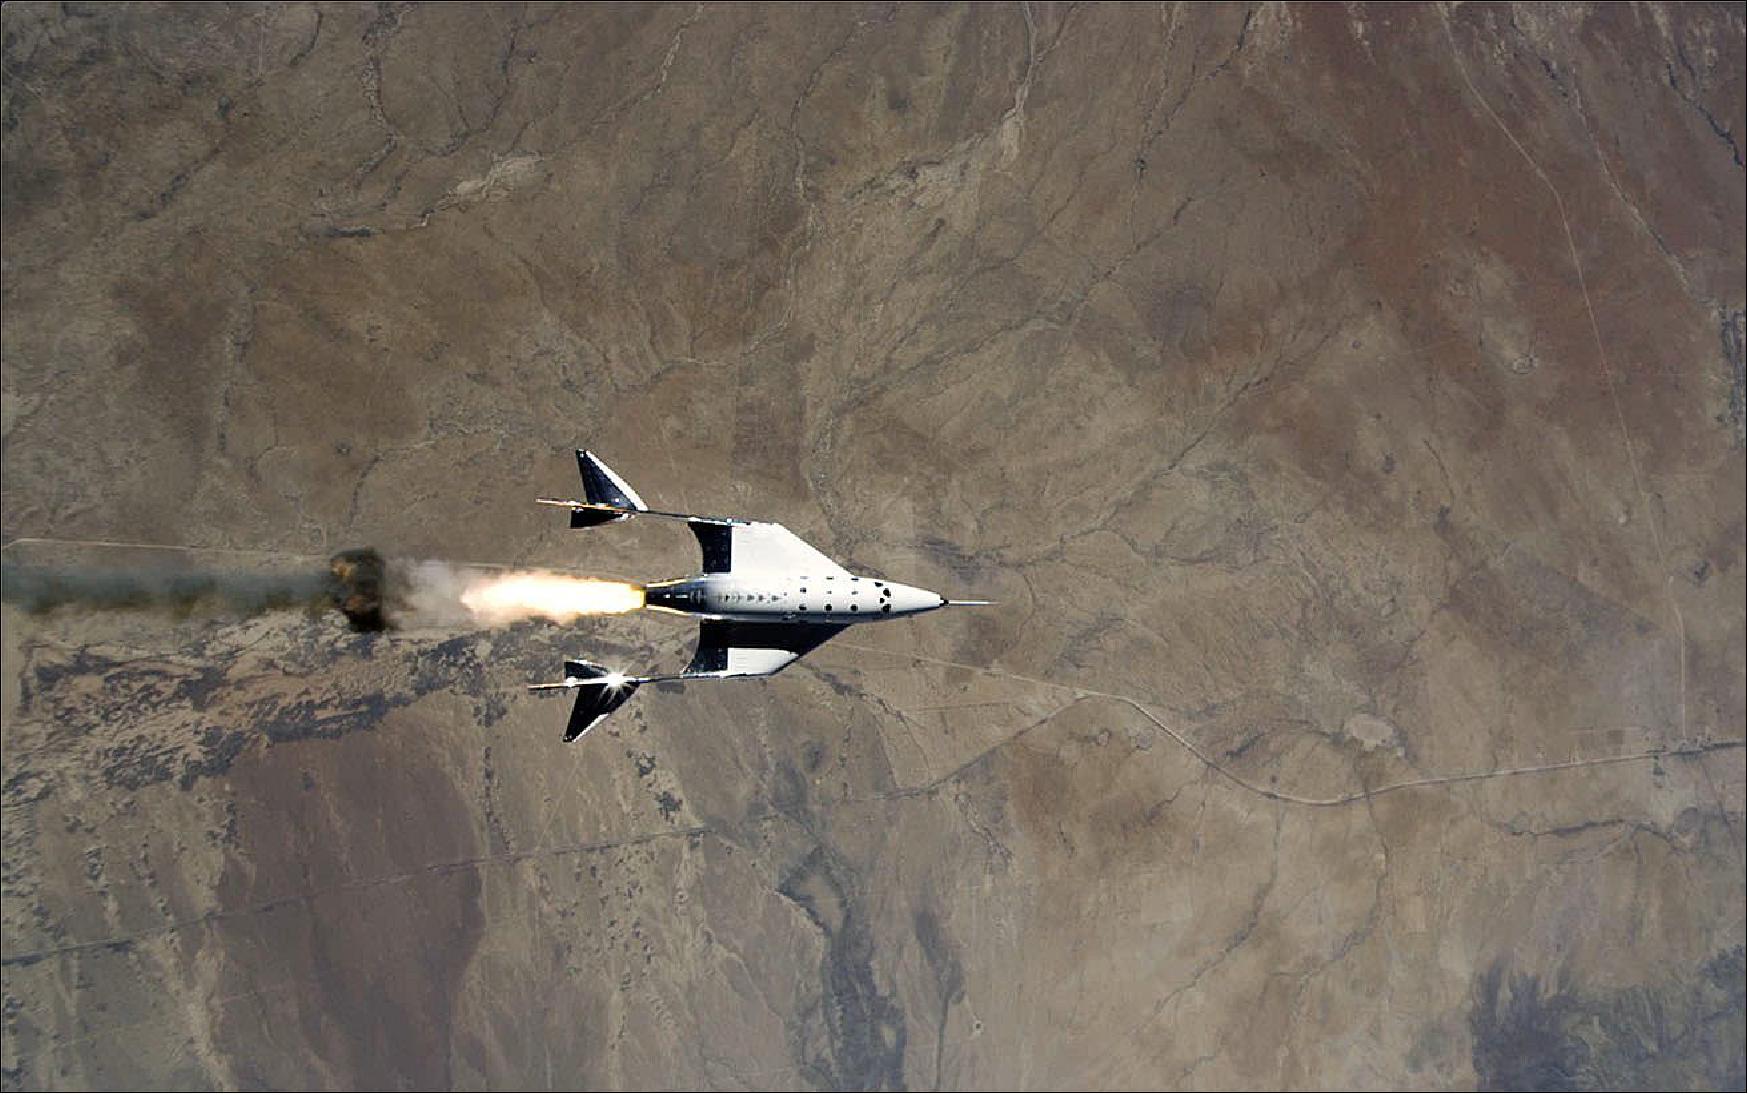 Figure 11: Start of SpaceShip Two spaceflight after being released from the WightKnight Two carrier aircraft at altitudes of >12 km (image credit: Virgin Galactic)